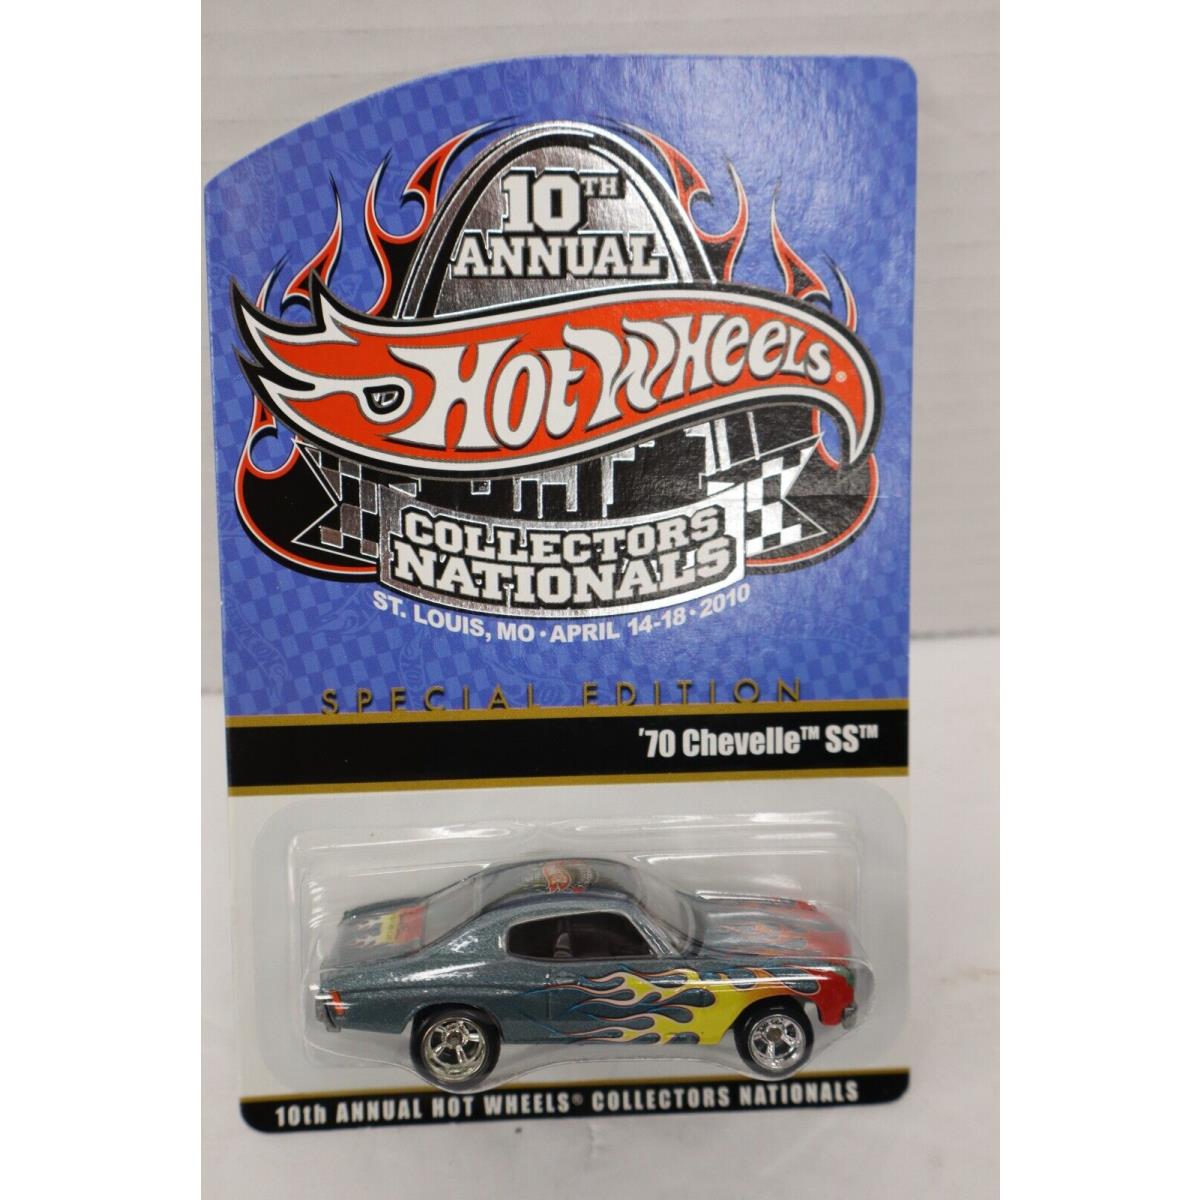 2010 Hot Wheels 10th Nationals Convention MO 70 Chevelle SS 781 Dinner Car